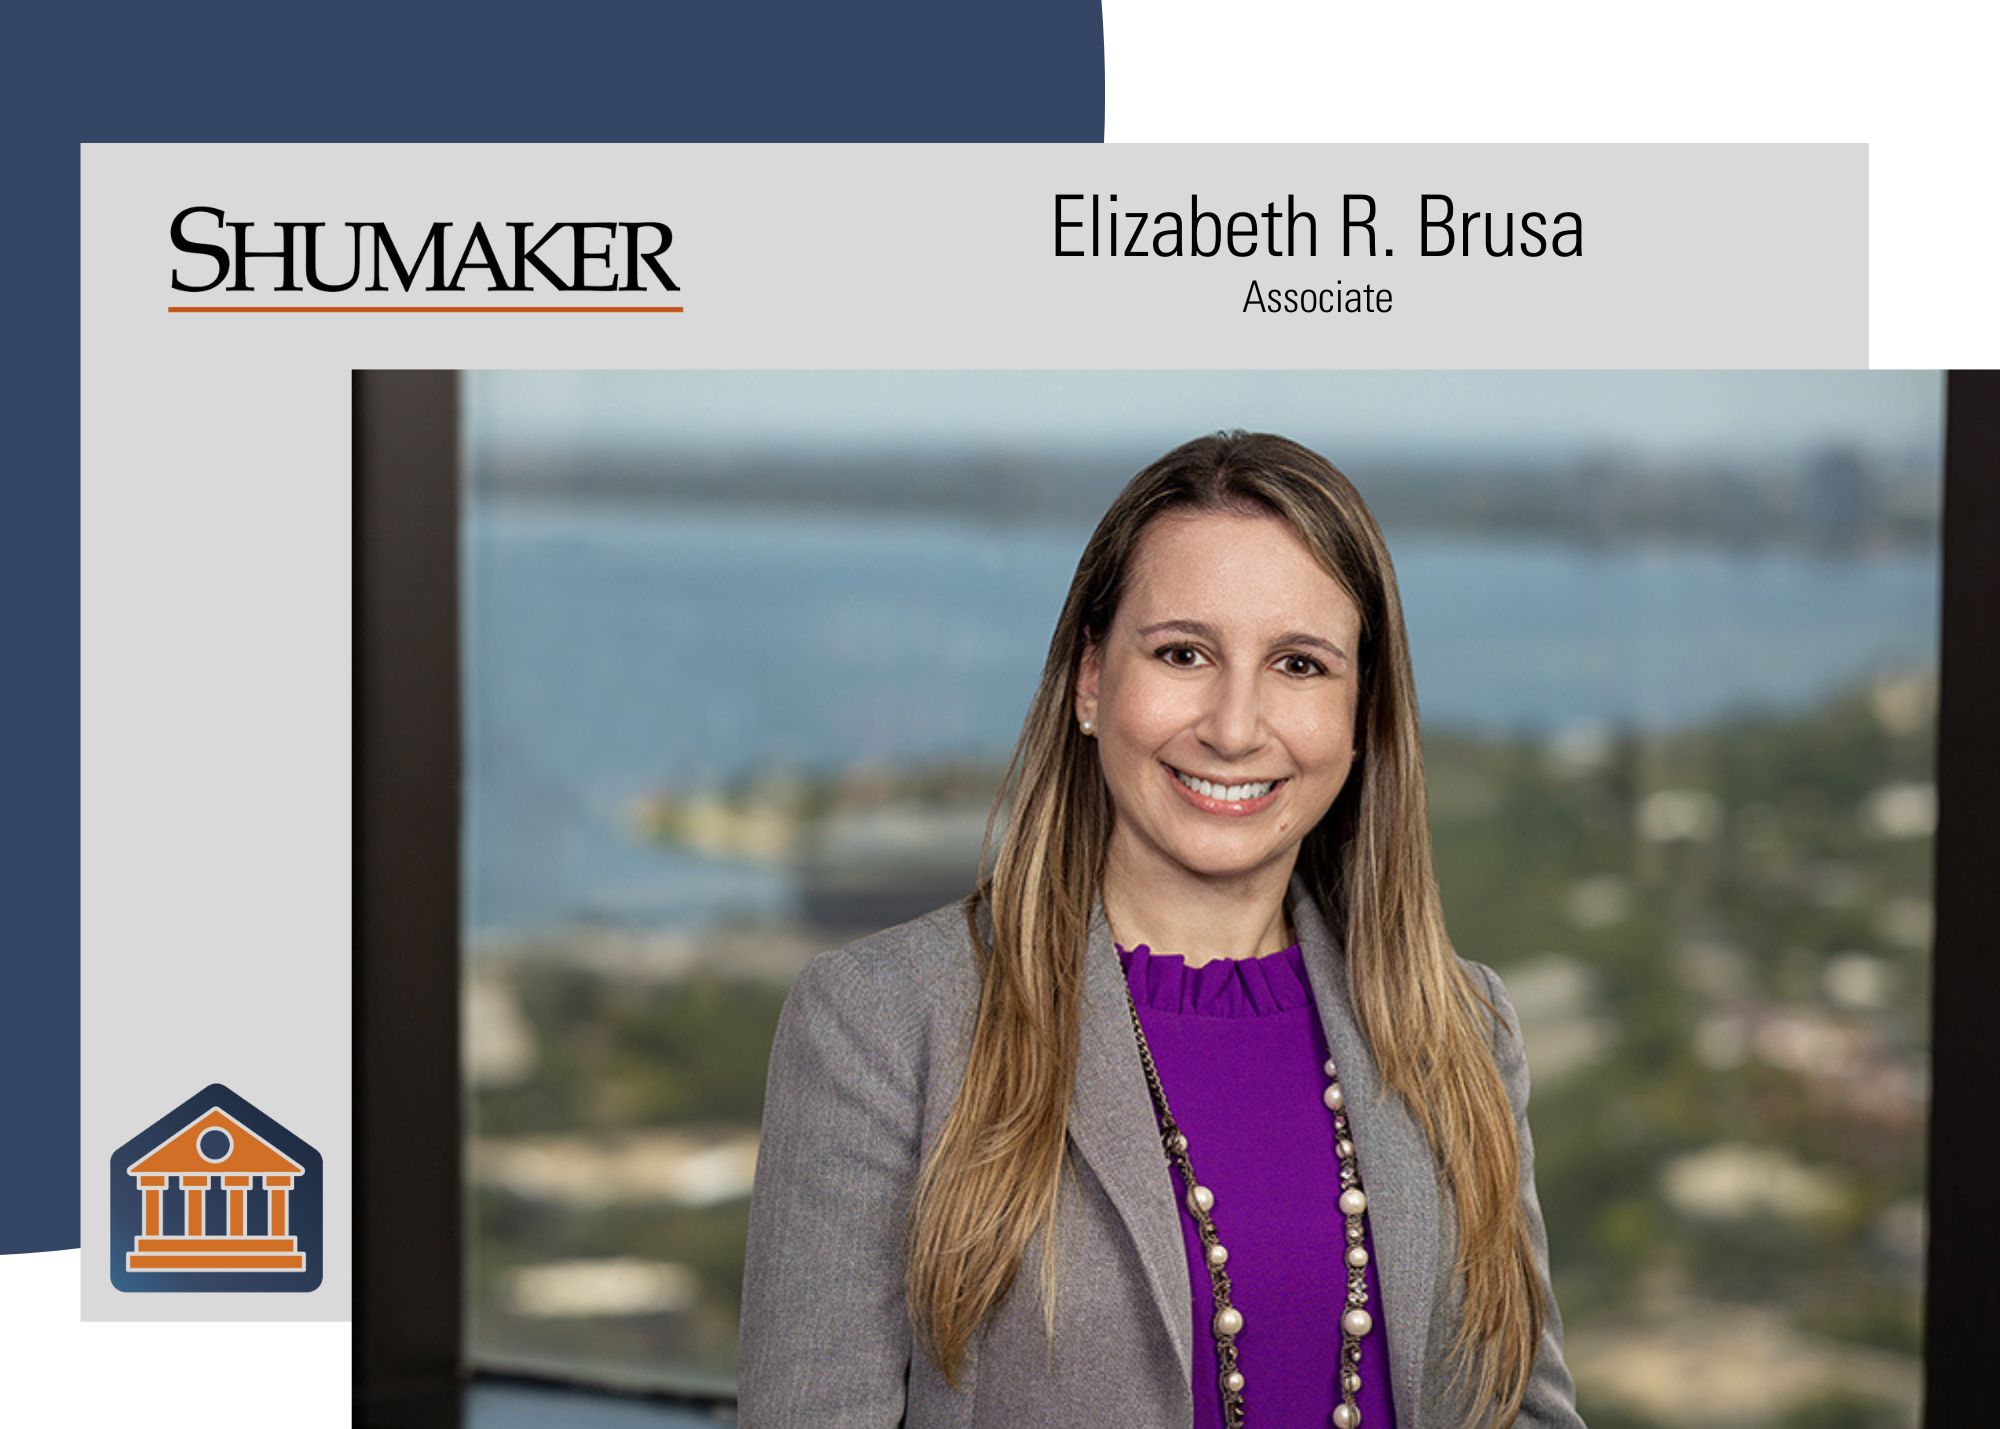 Elizabeth R. Brusa Joins Shumaker to Expand Firm’s Capabilities in Bankruptcy, Insolvency, and Creditors’ Rights